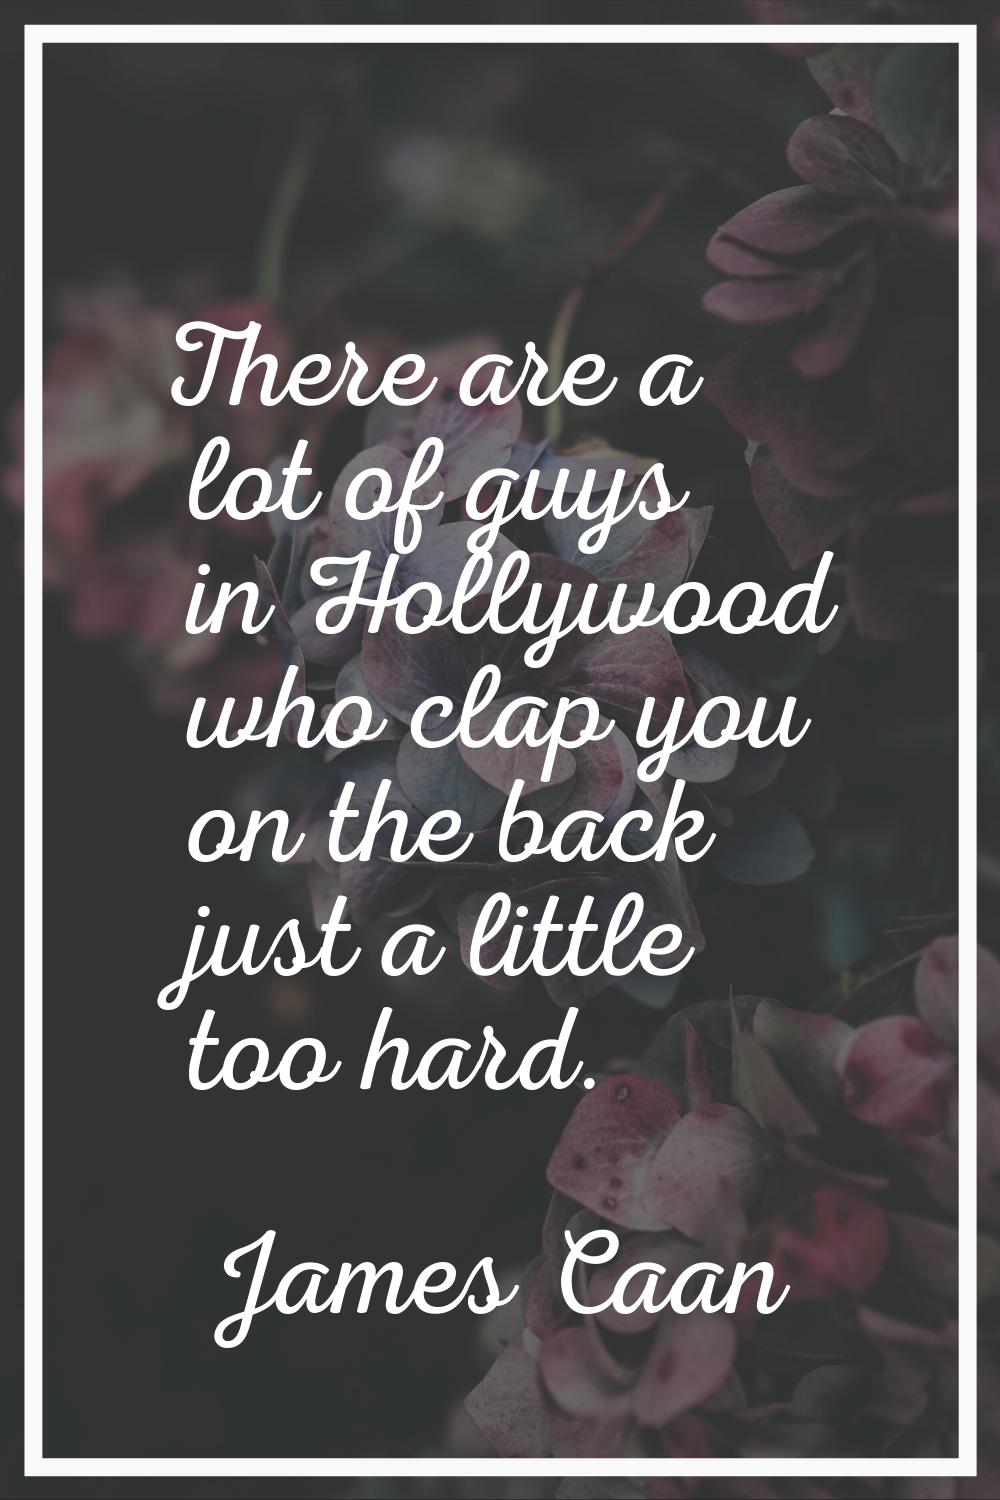 There are a lot of guys in Hollywood who clap you on the back just a little too hard.